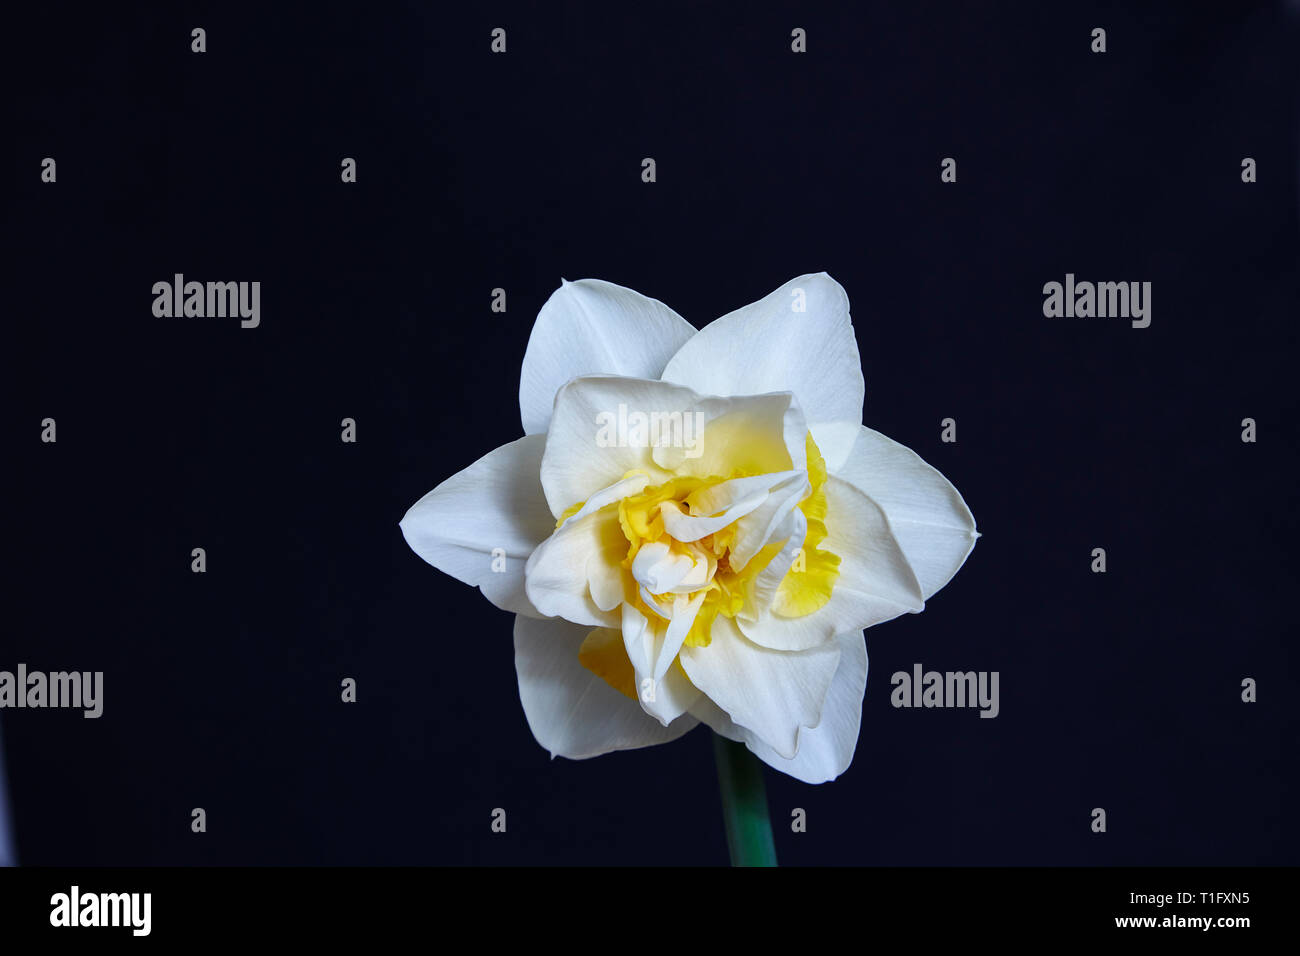 A double daffodil,Narcissus,white and orange,head with a black background. Stock Photo